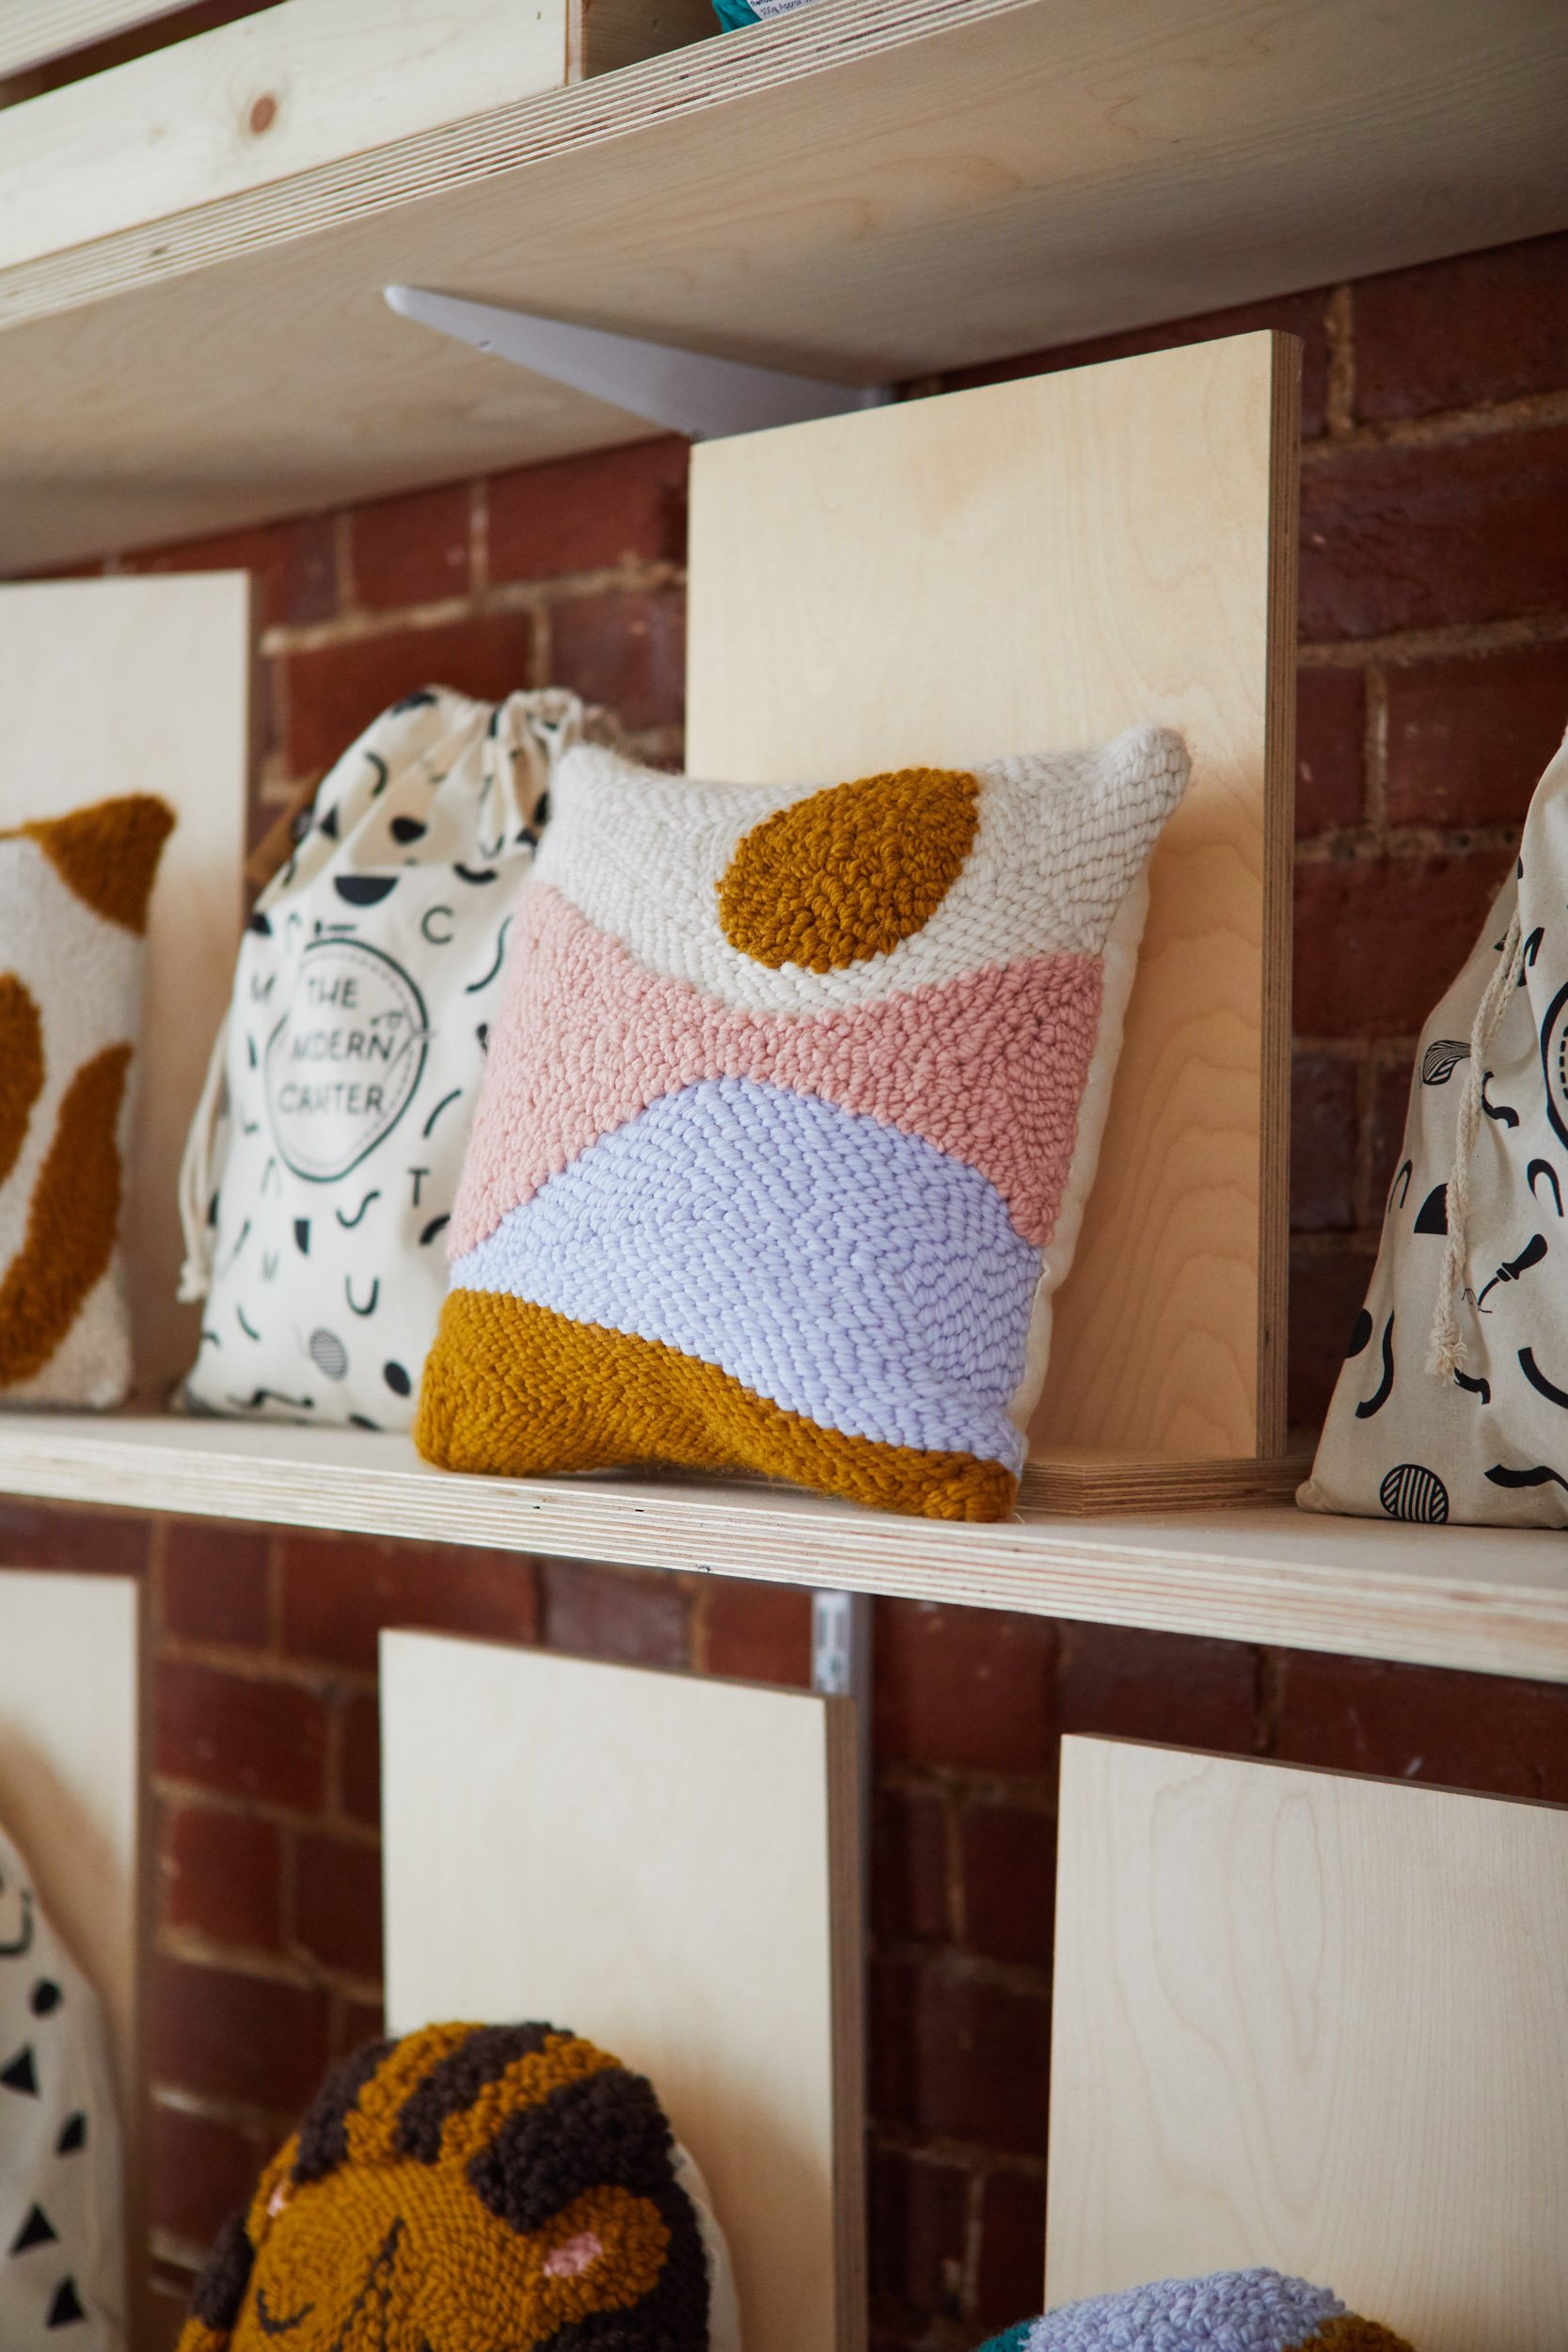 Stylish punch needle cushion in The Modern Crafter store in Saffron Walden